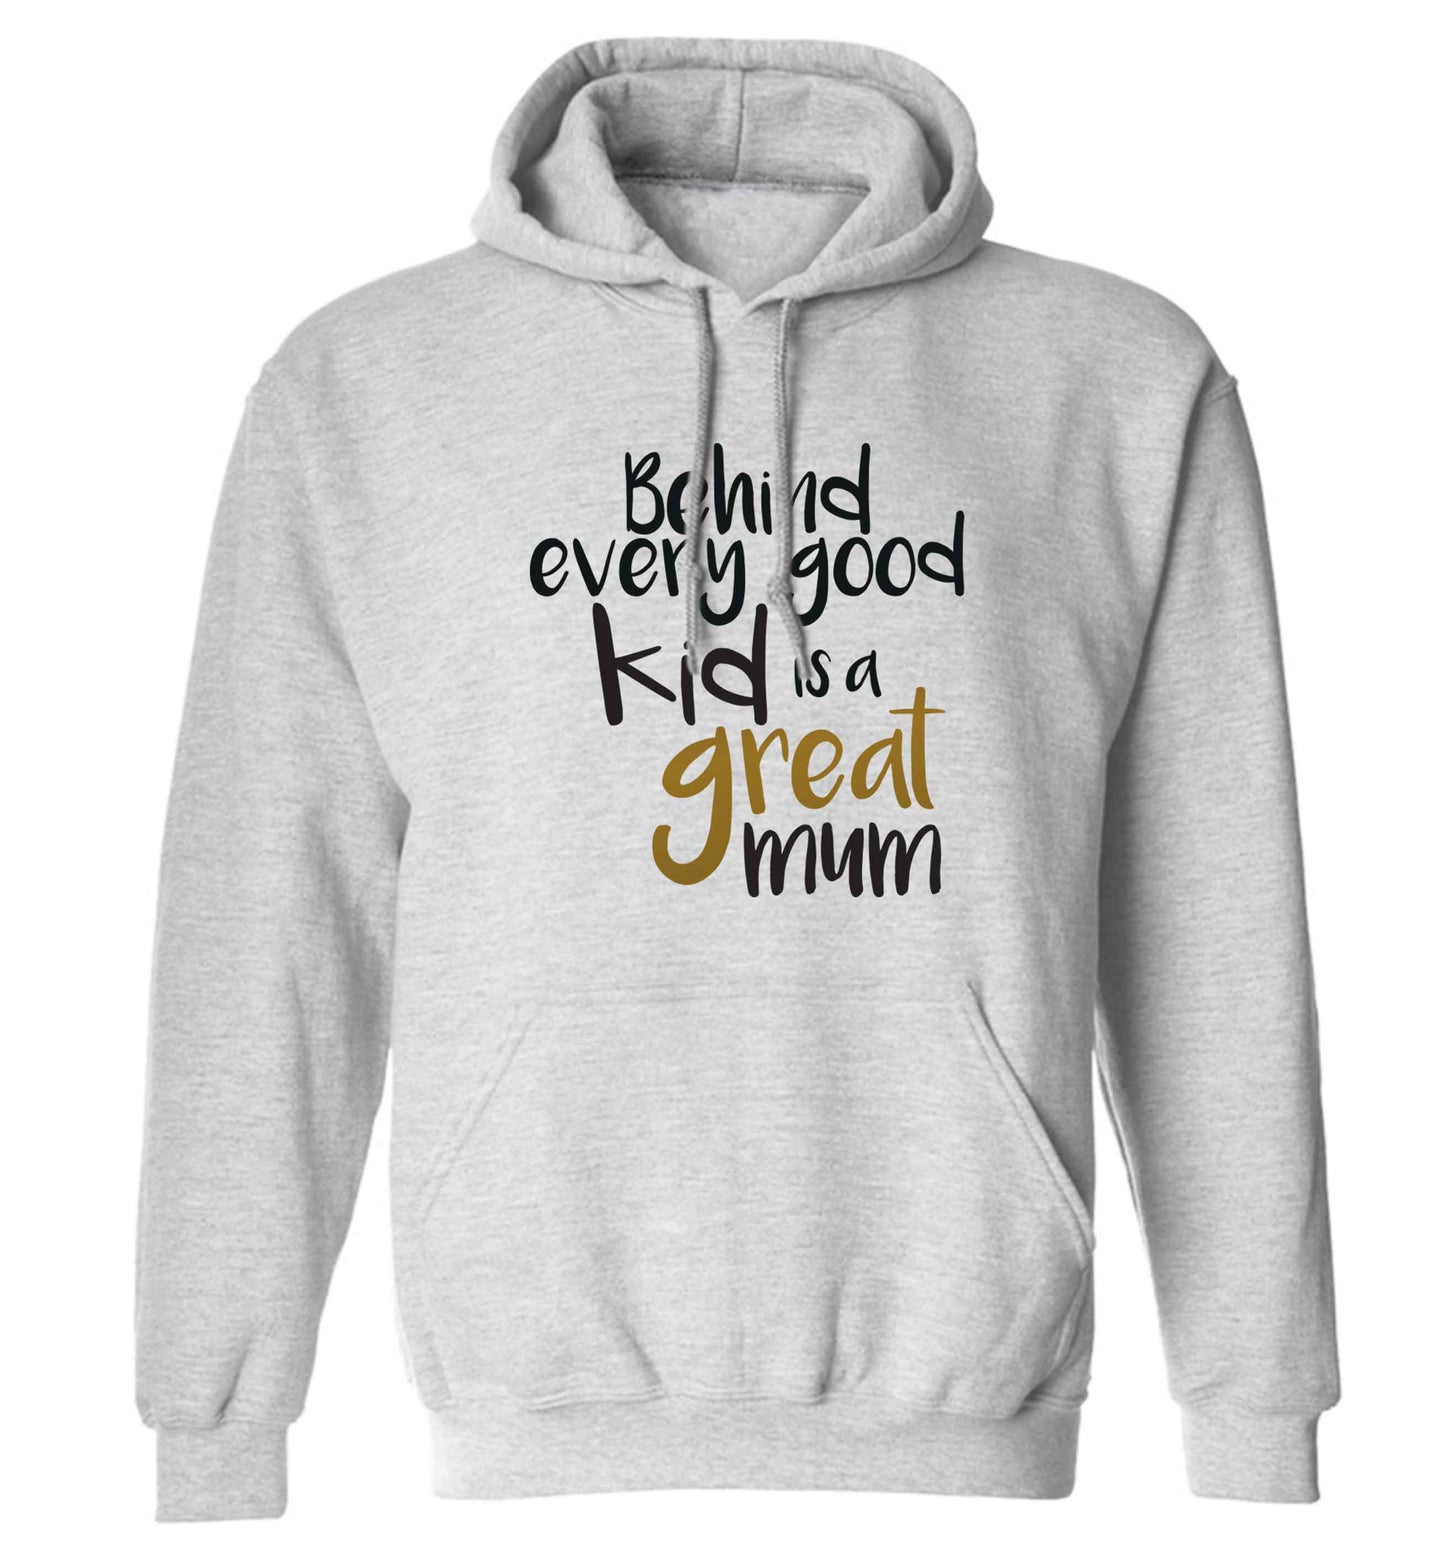 Behind every good kid is a great mum adults unisex grey hoodie 2XL